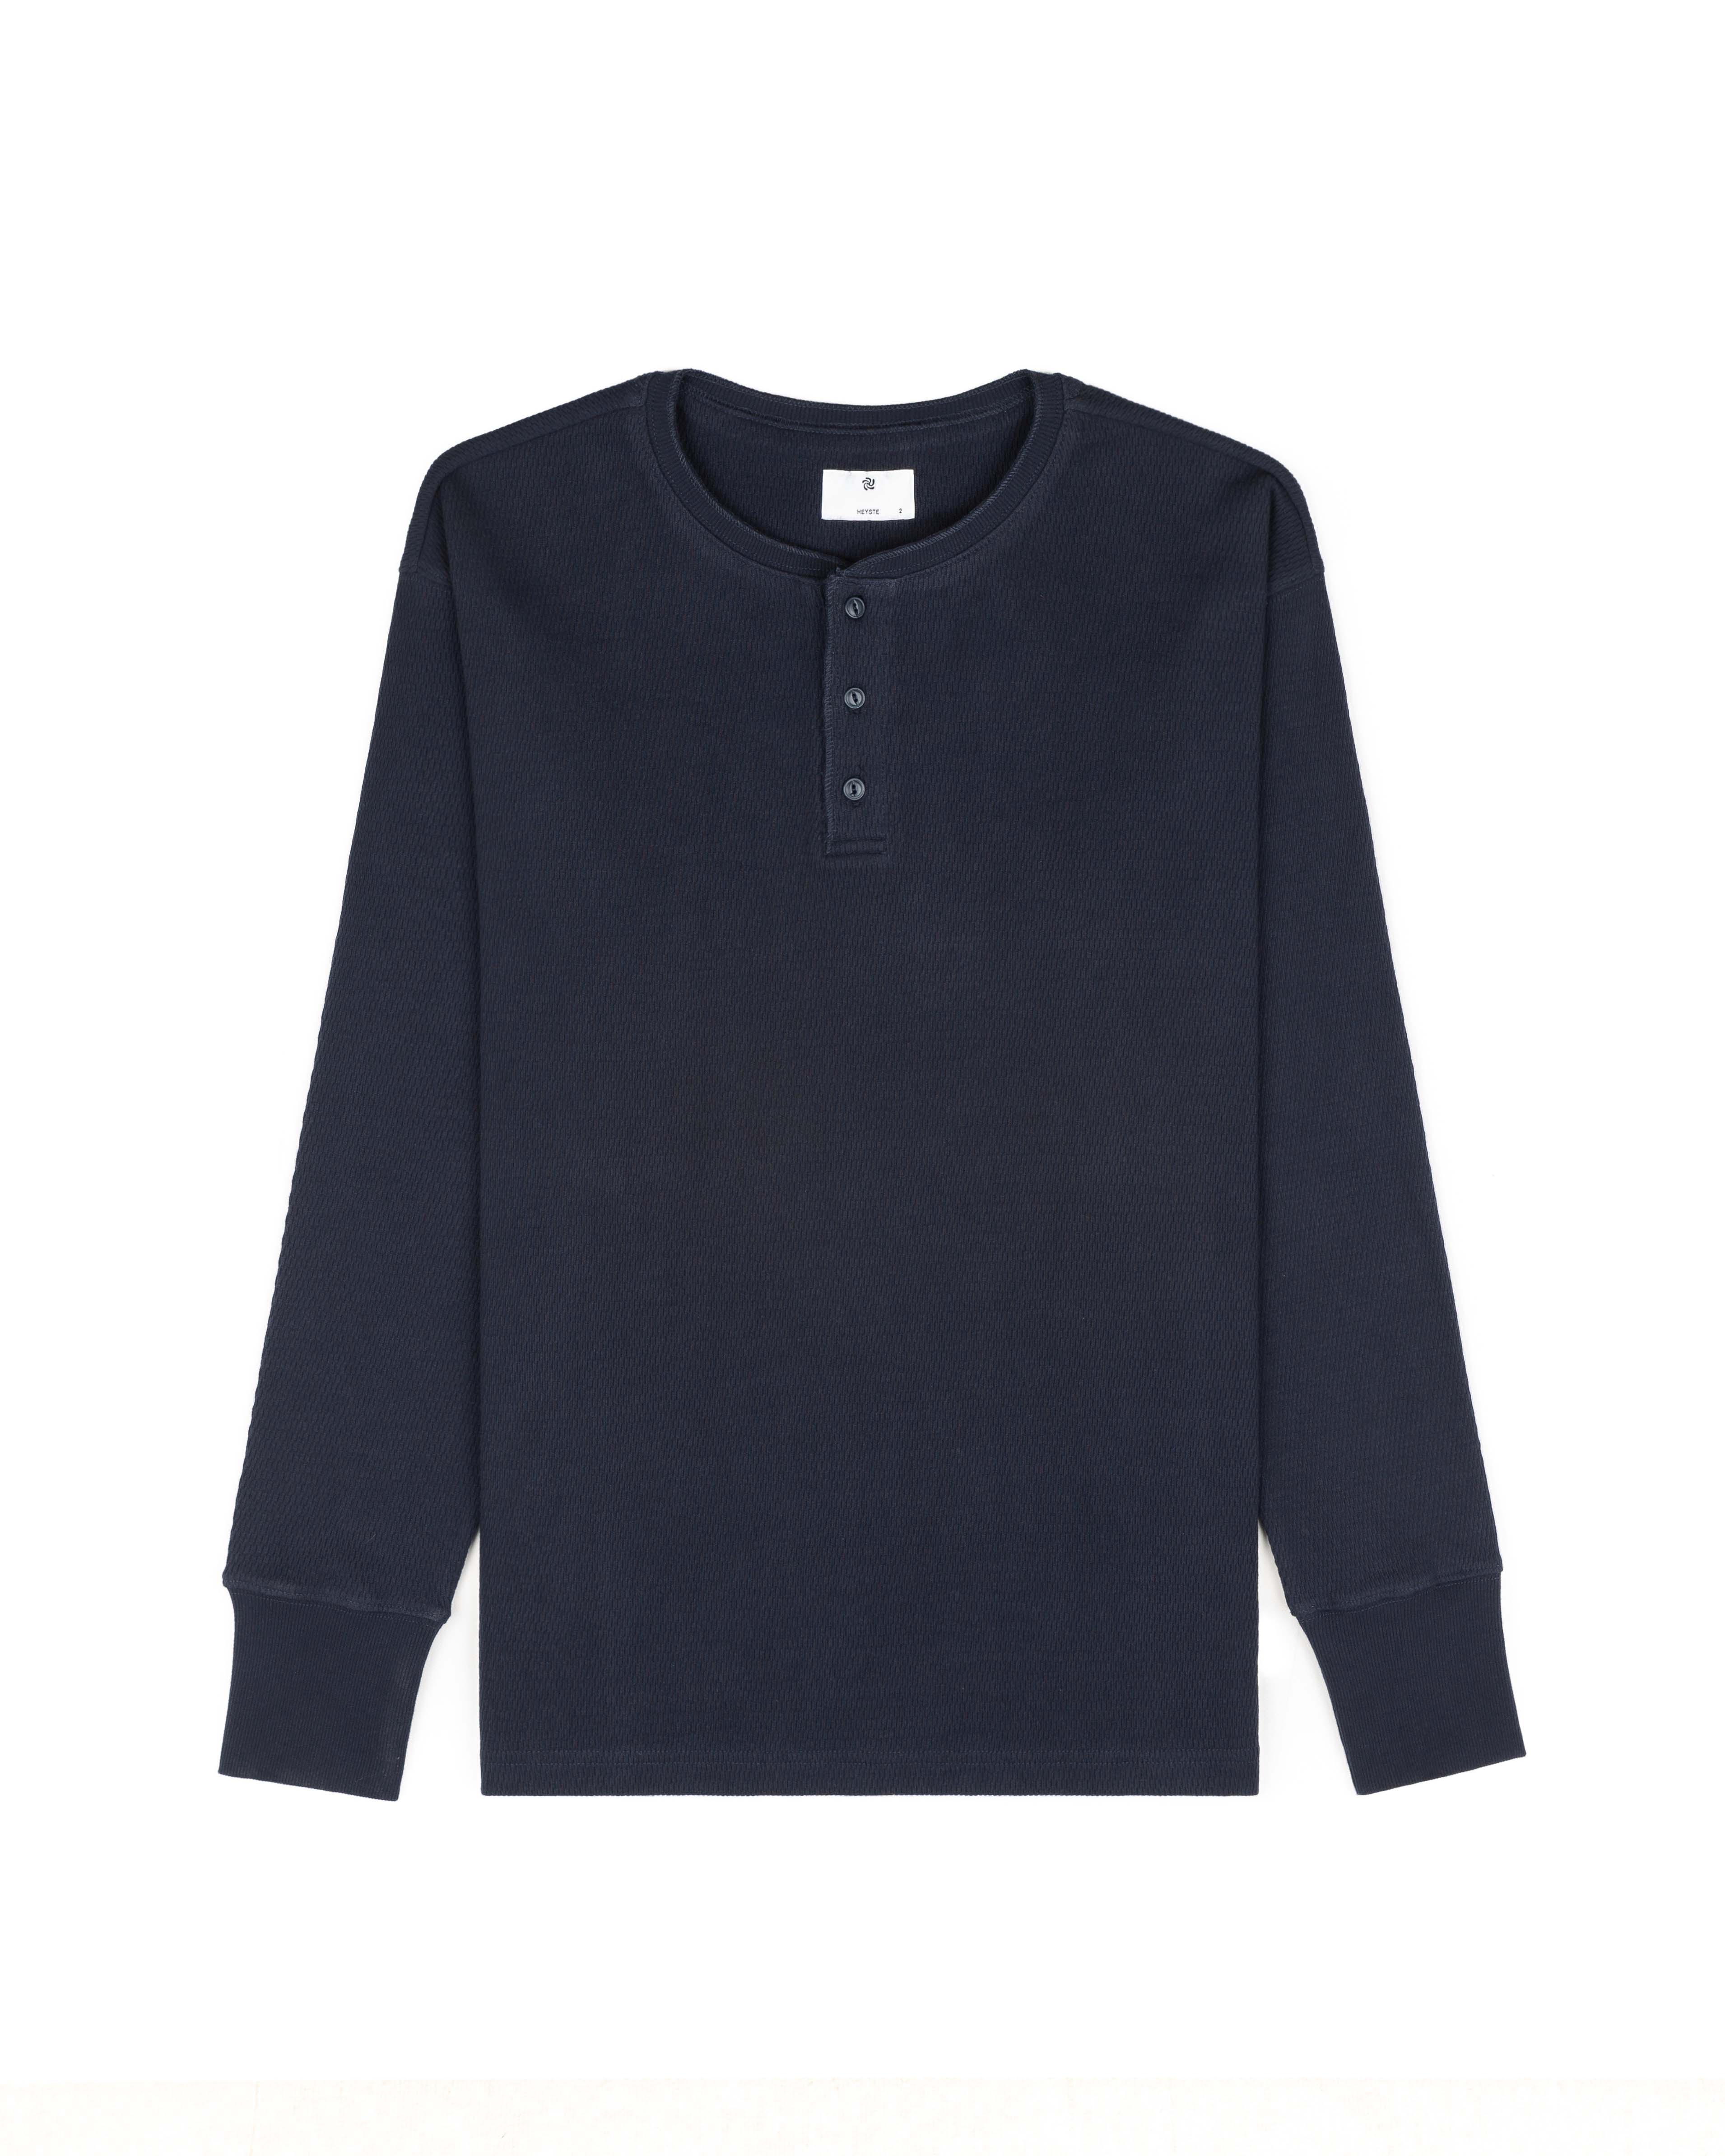 3 Button Thermal Knit Henley Shirt / midnight navy